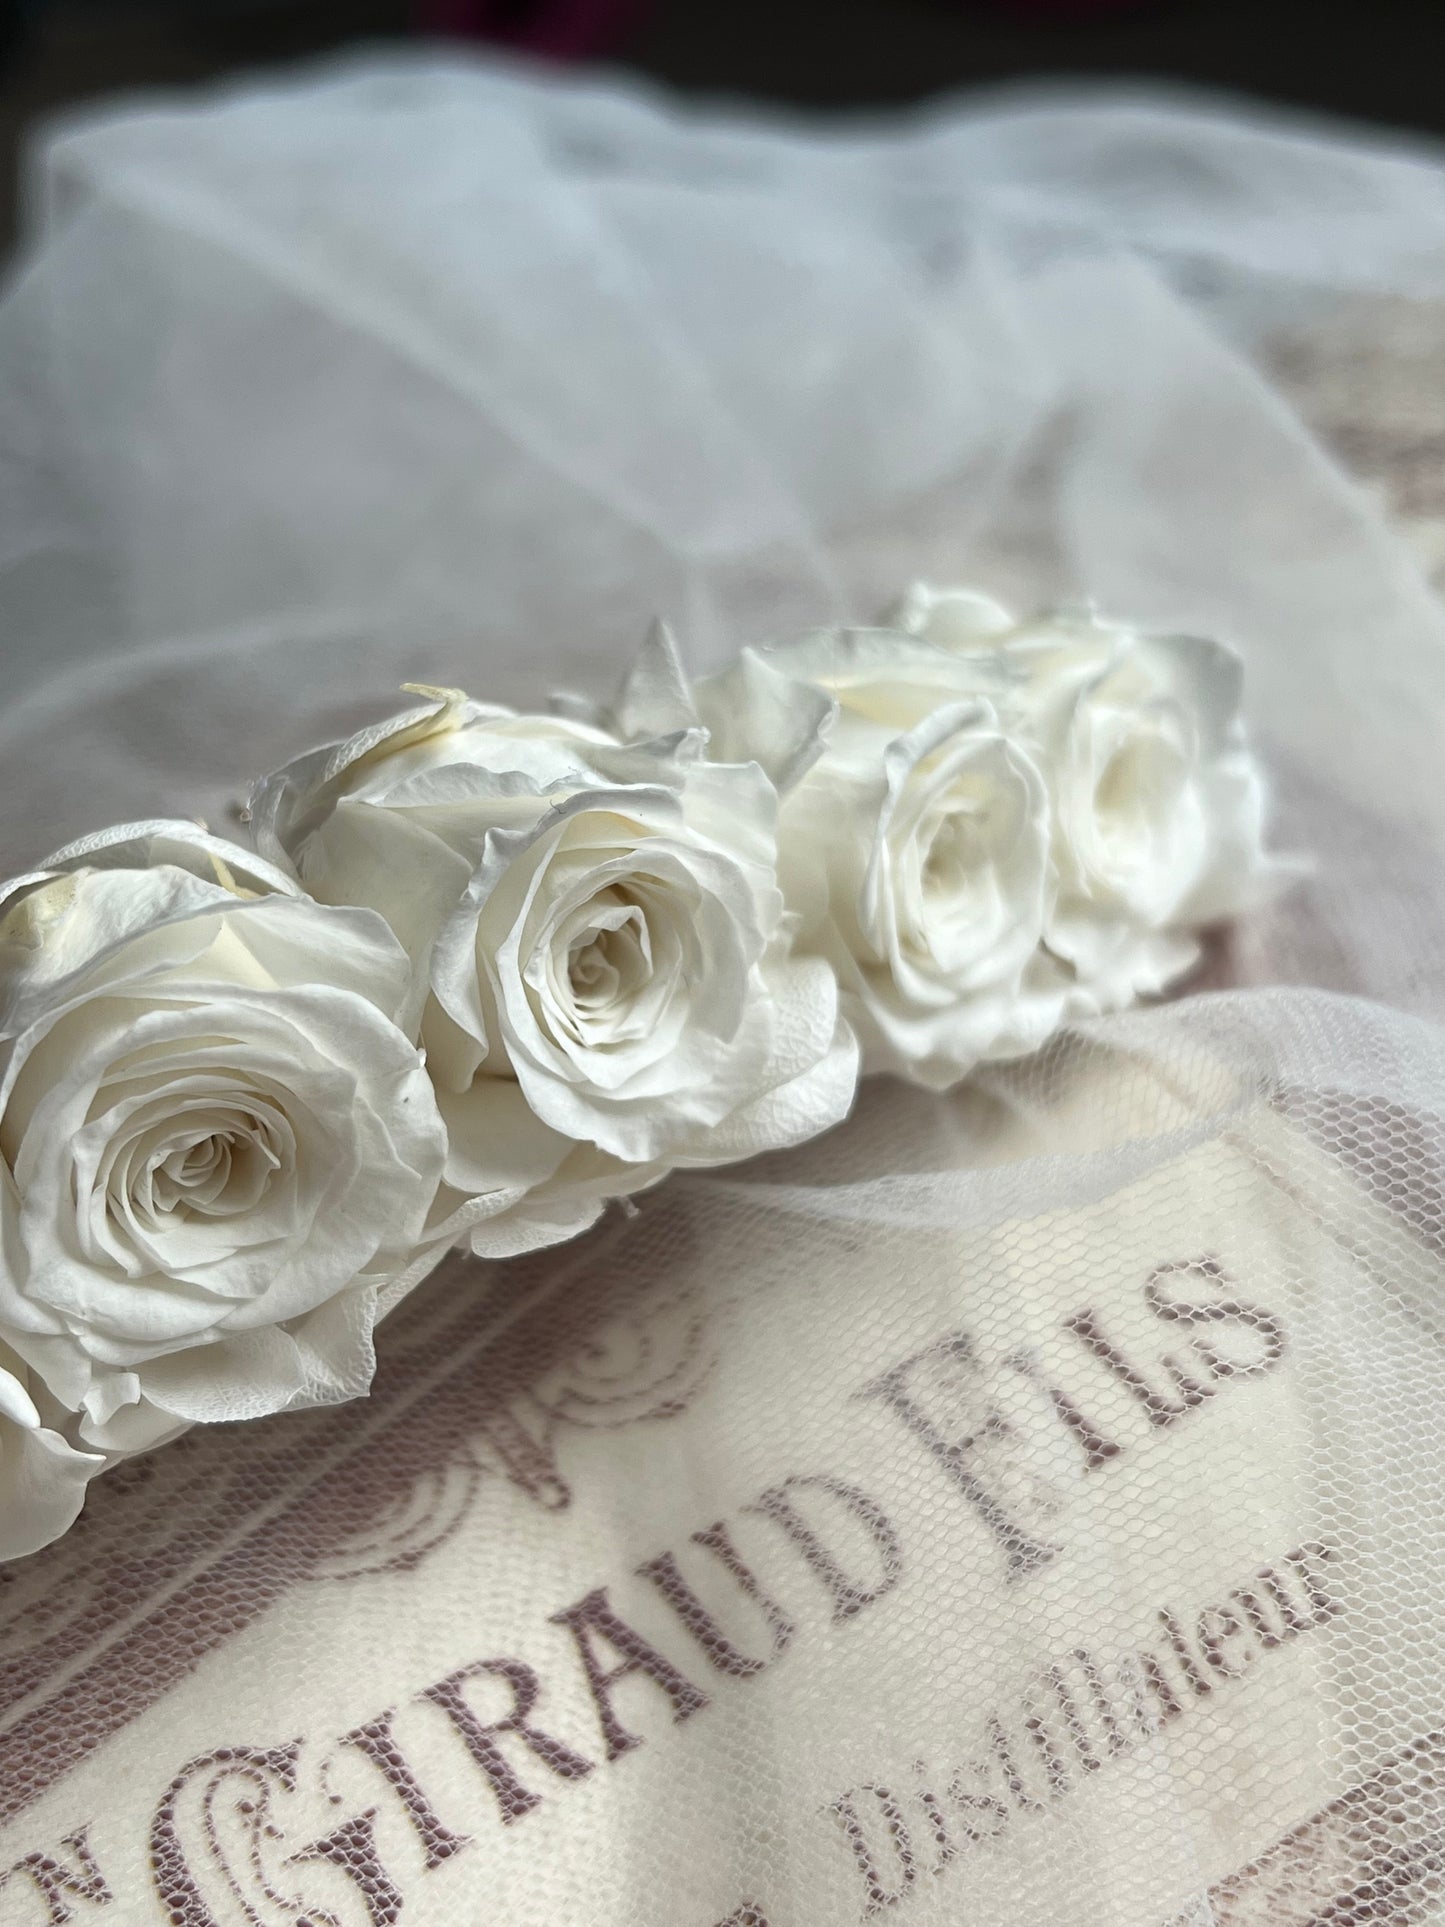 Bridal Rose Hair Comb, White Floral Hair Comb for Wedding, Bridal Floral Hair Accessories, White Rose Headpiece, Classic Wedding Comb